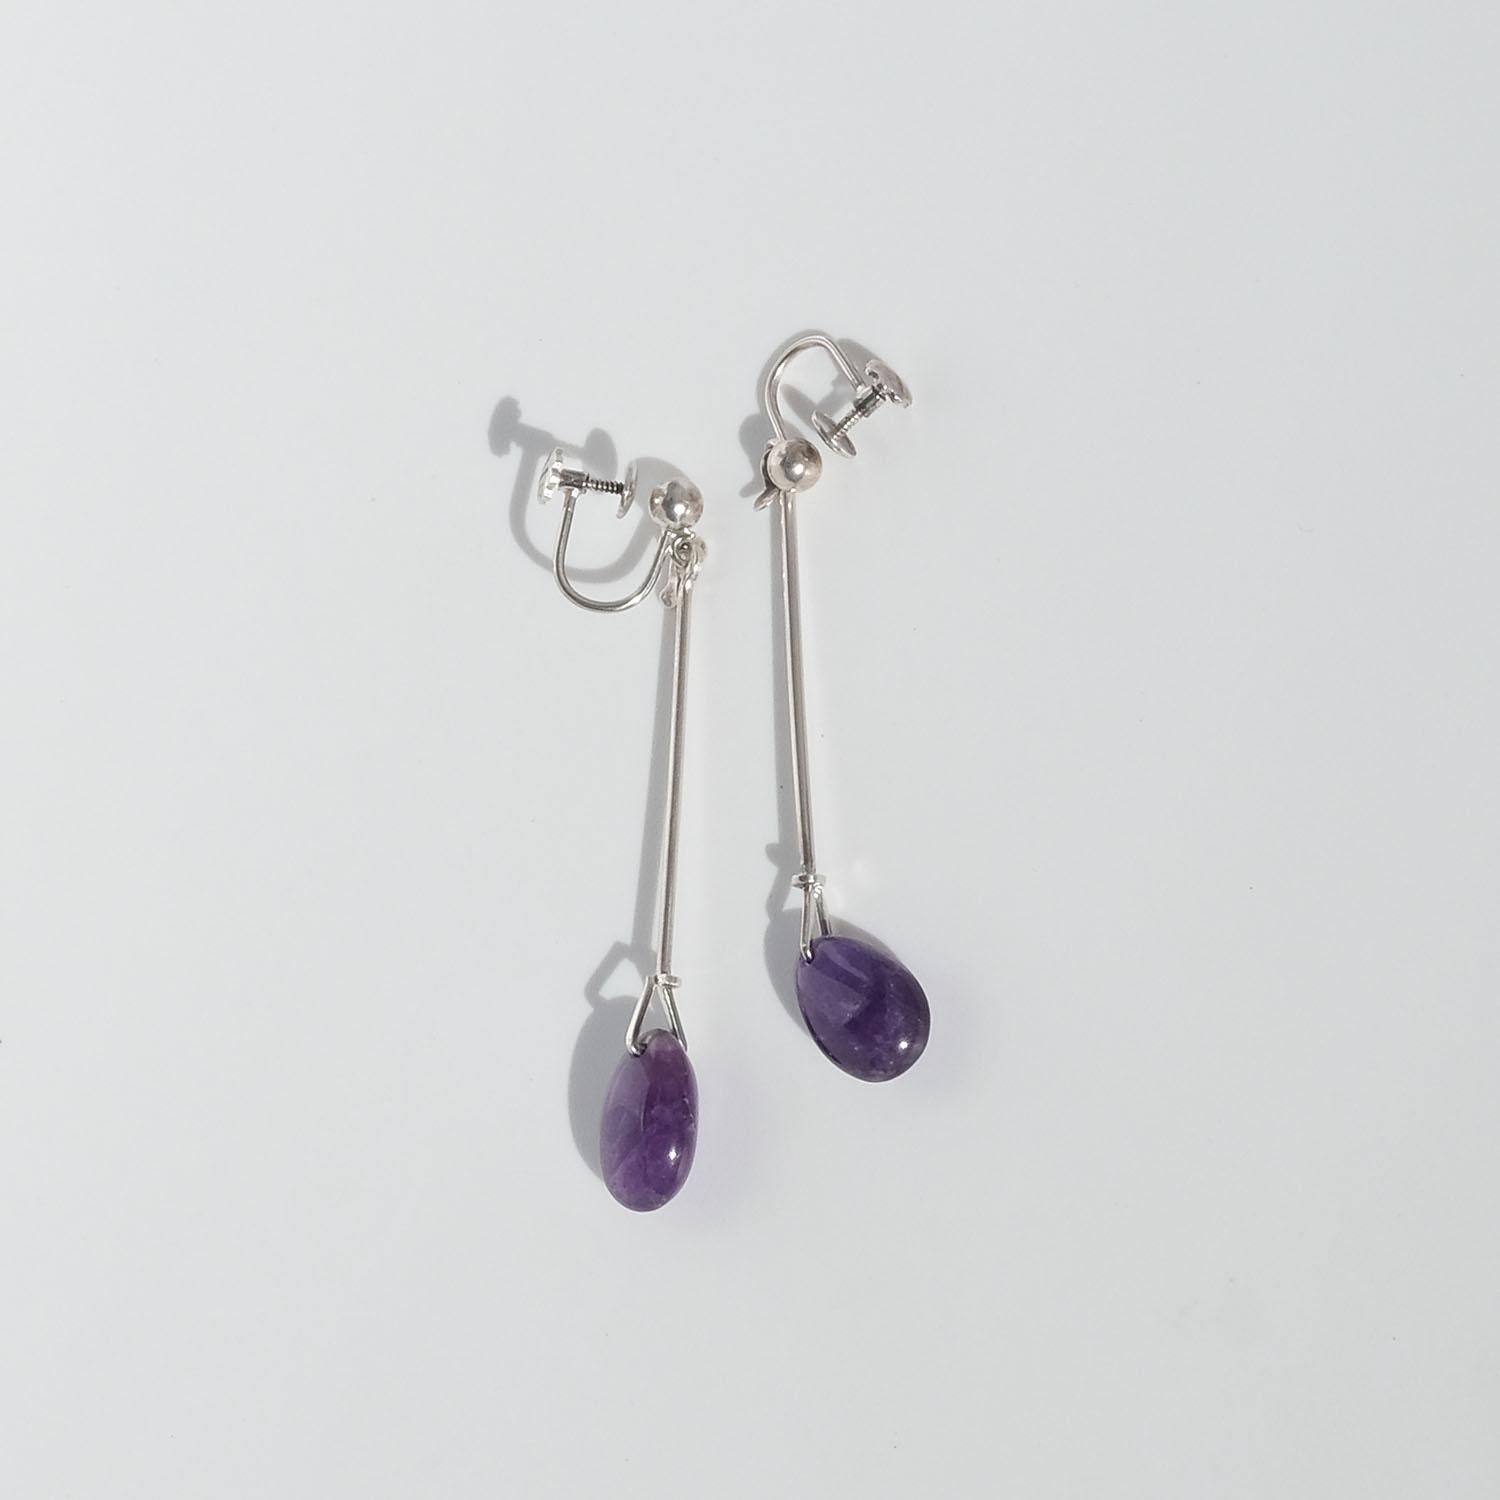 These silver earrings are adorned with teardrop shaped amethysts which dangle beautifully along its wearer's neck. The earrings are part of Vivianna Torun Bülow-Hübe's world known collection Dew Drop, which she designed in the mid 1950s; a